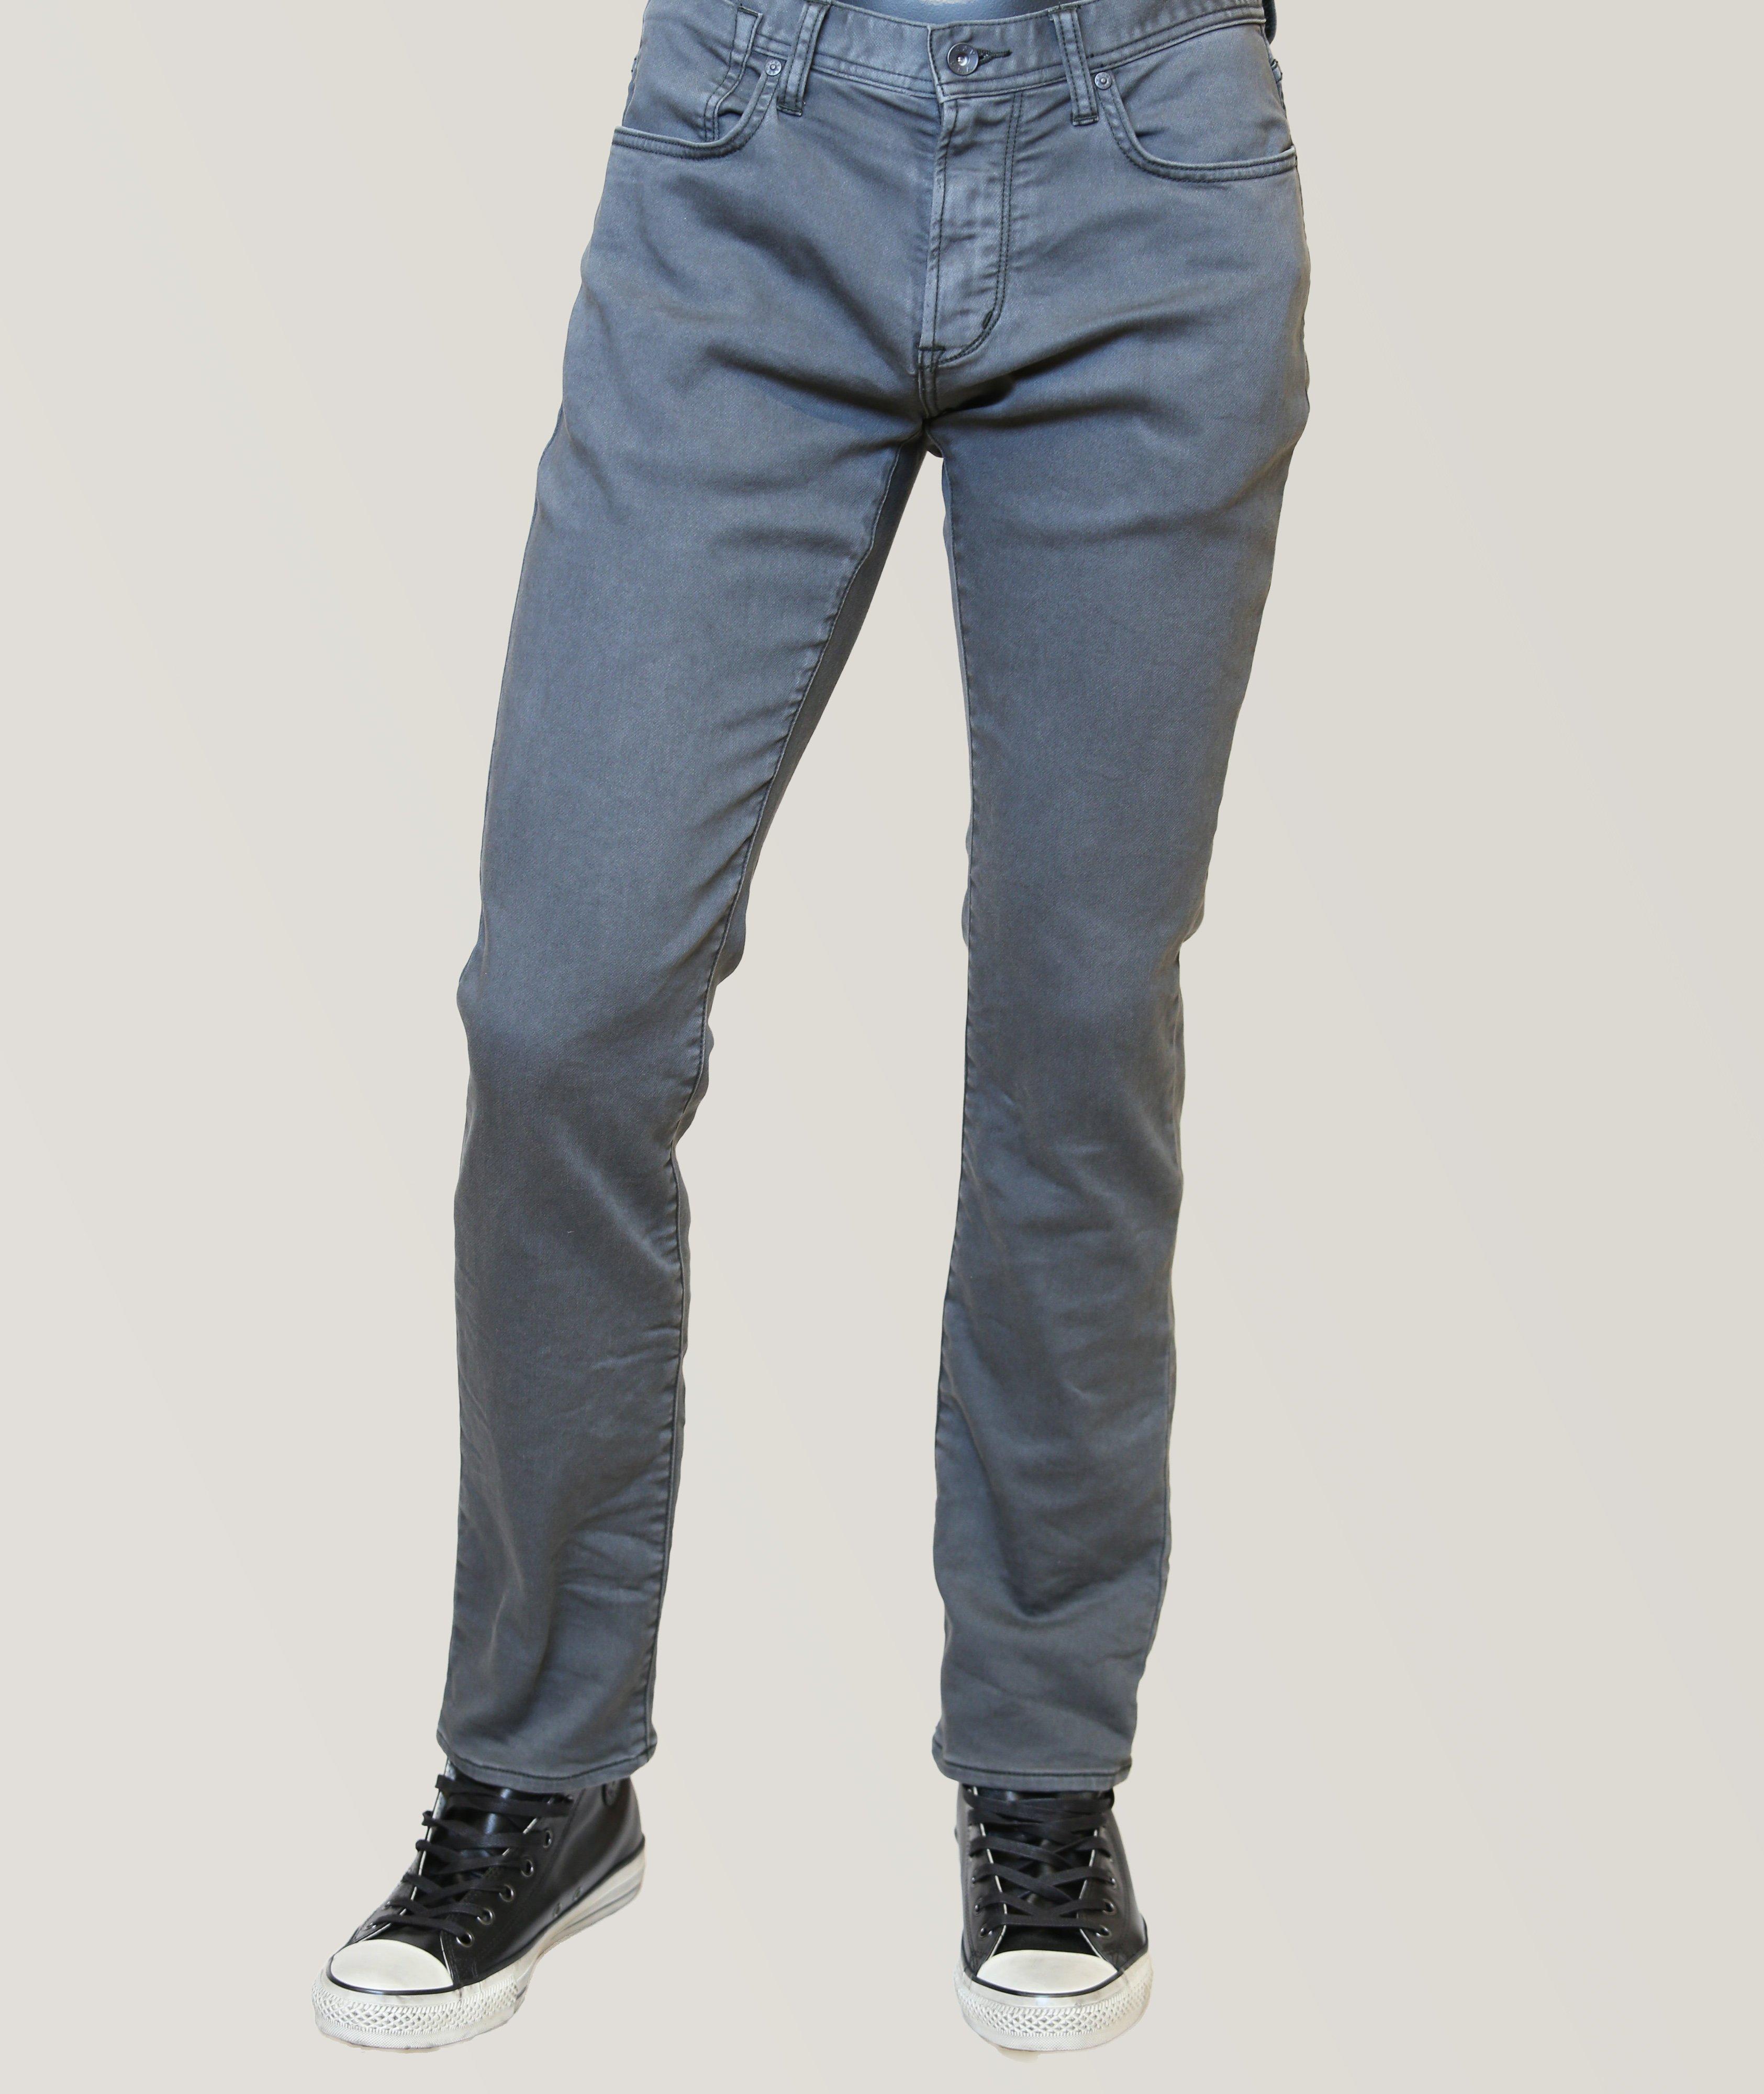 Bowery Cotton-Blend Jeans image 2